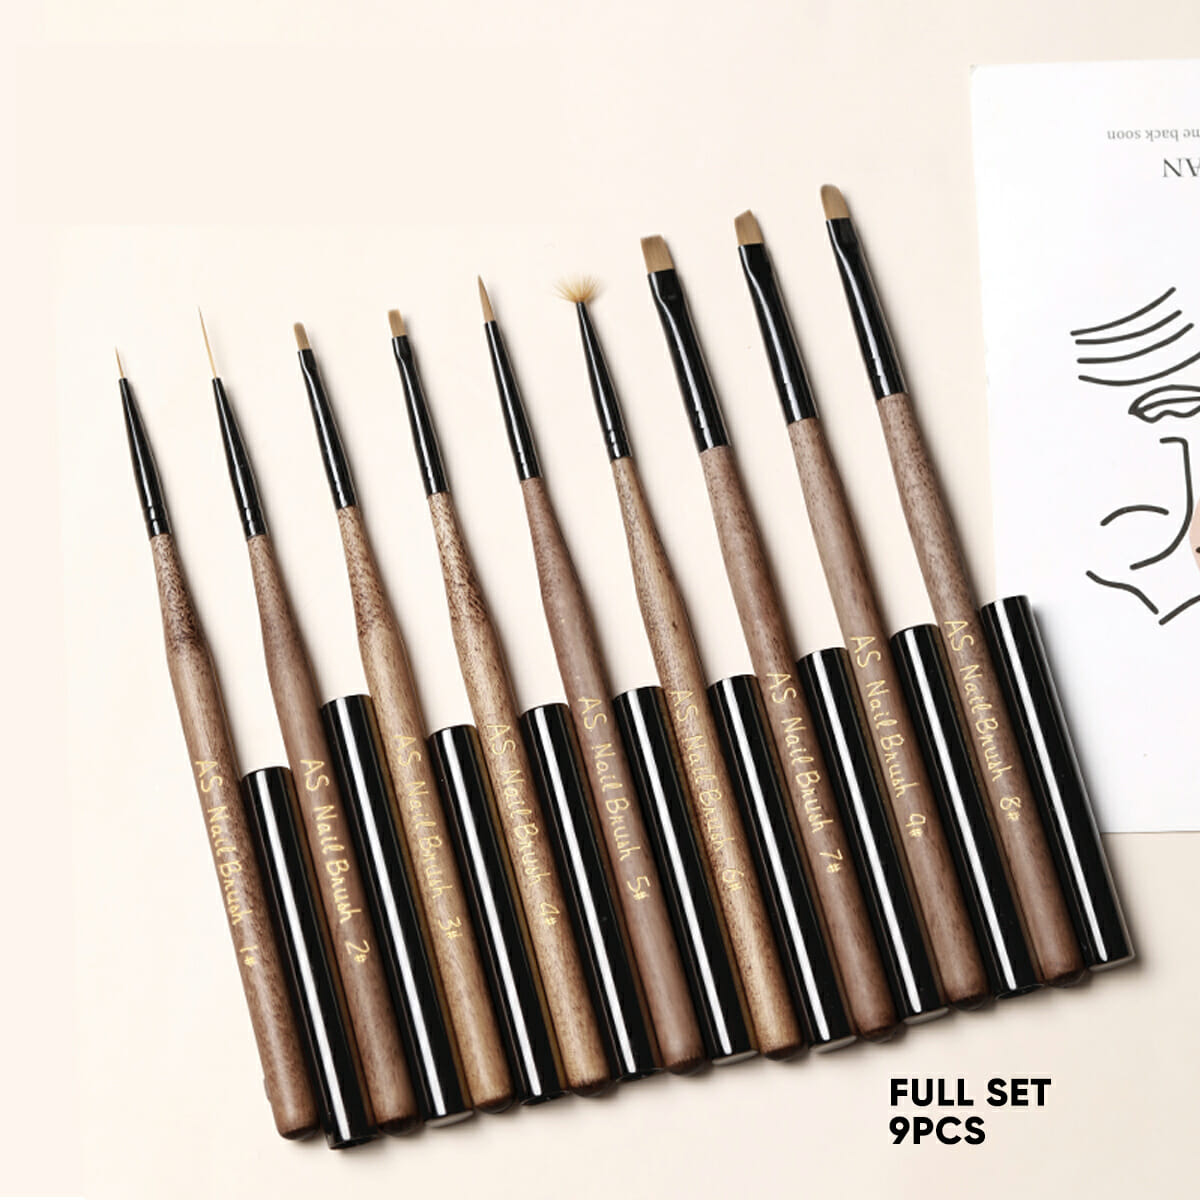 Anothersexy Nail Art Premium Brushes in Full Set